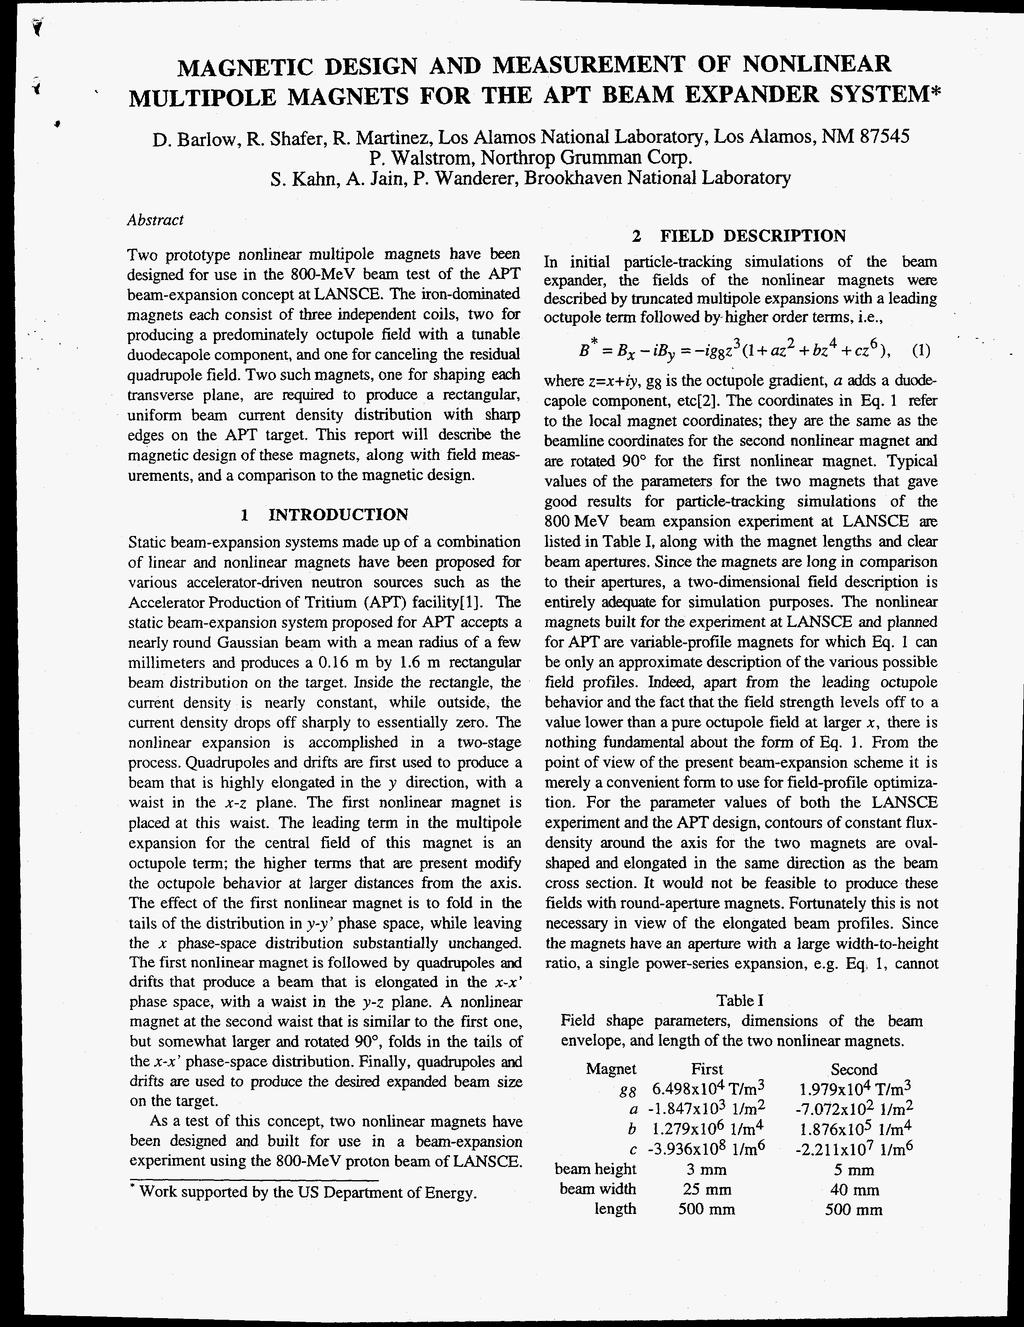 MAGNETIC DESIGN AND MEASUREMENT OF NONLINEAR MULTIPOLE MAGNETS FOR THE APT BEAM EXPANDER SYSTEM* D Barlow R Shafer R Martinez Los Alamos National Laboratory Los Alamos NM 87545 P Walstrom Northrop G